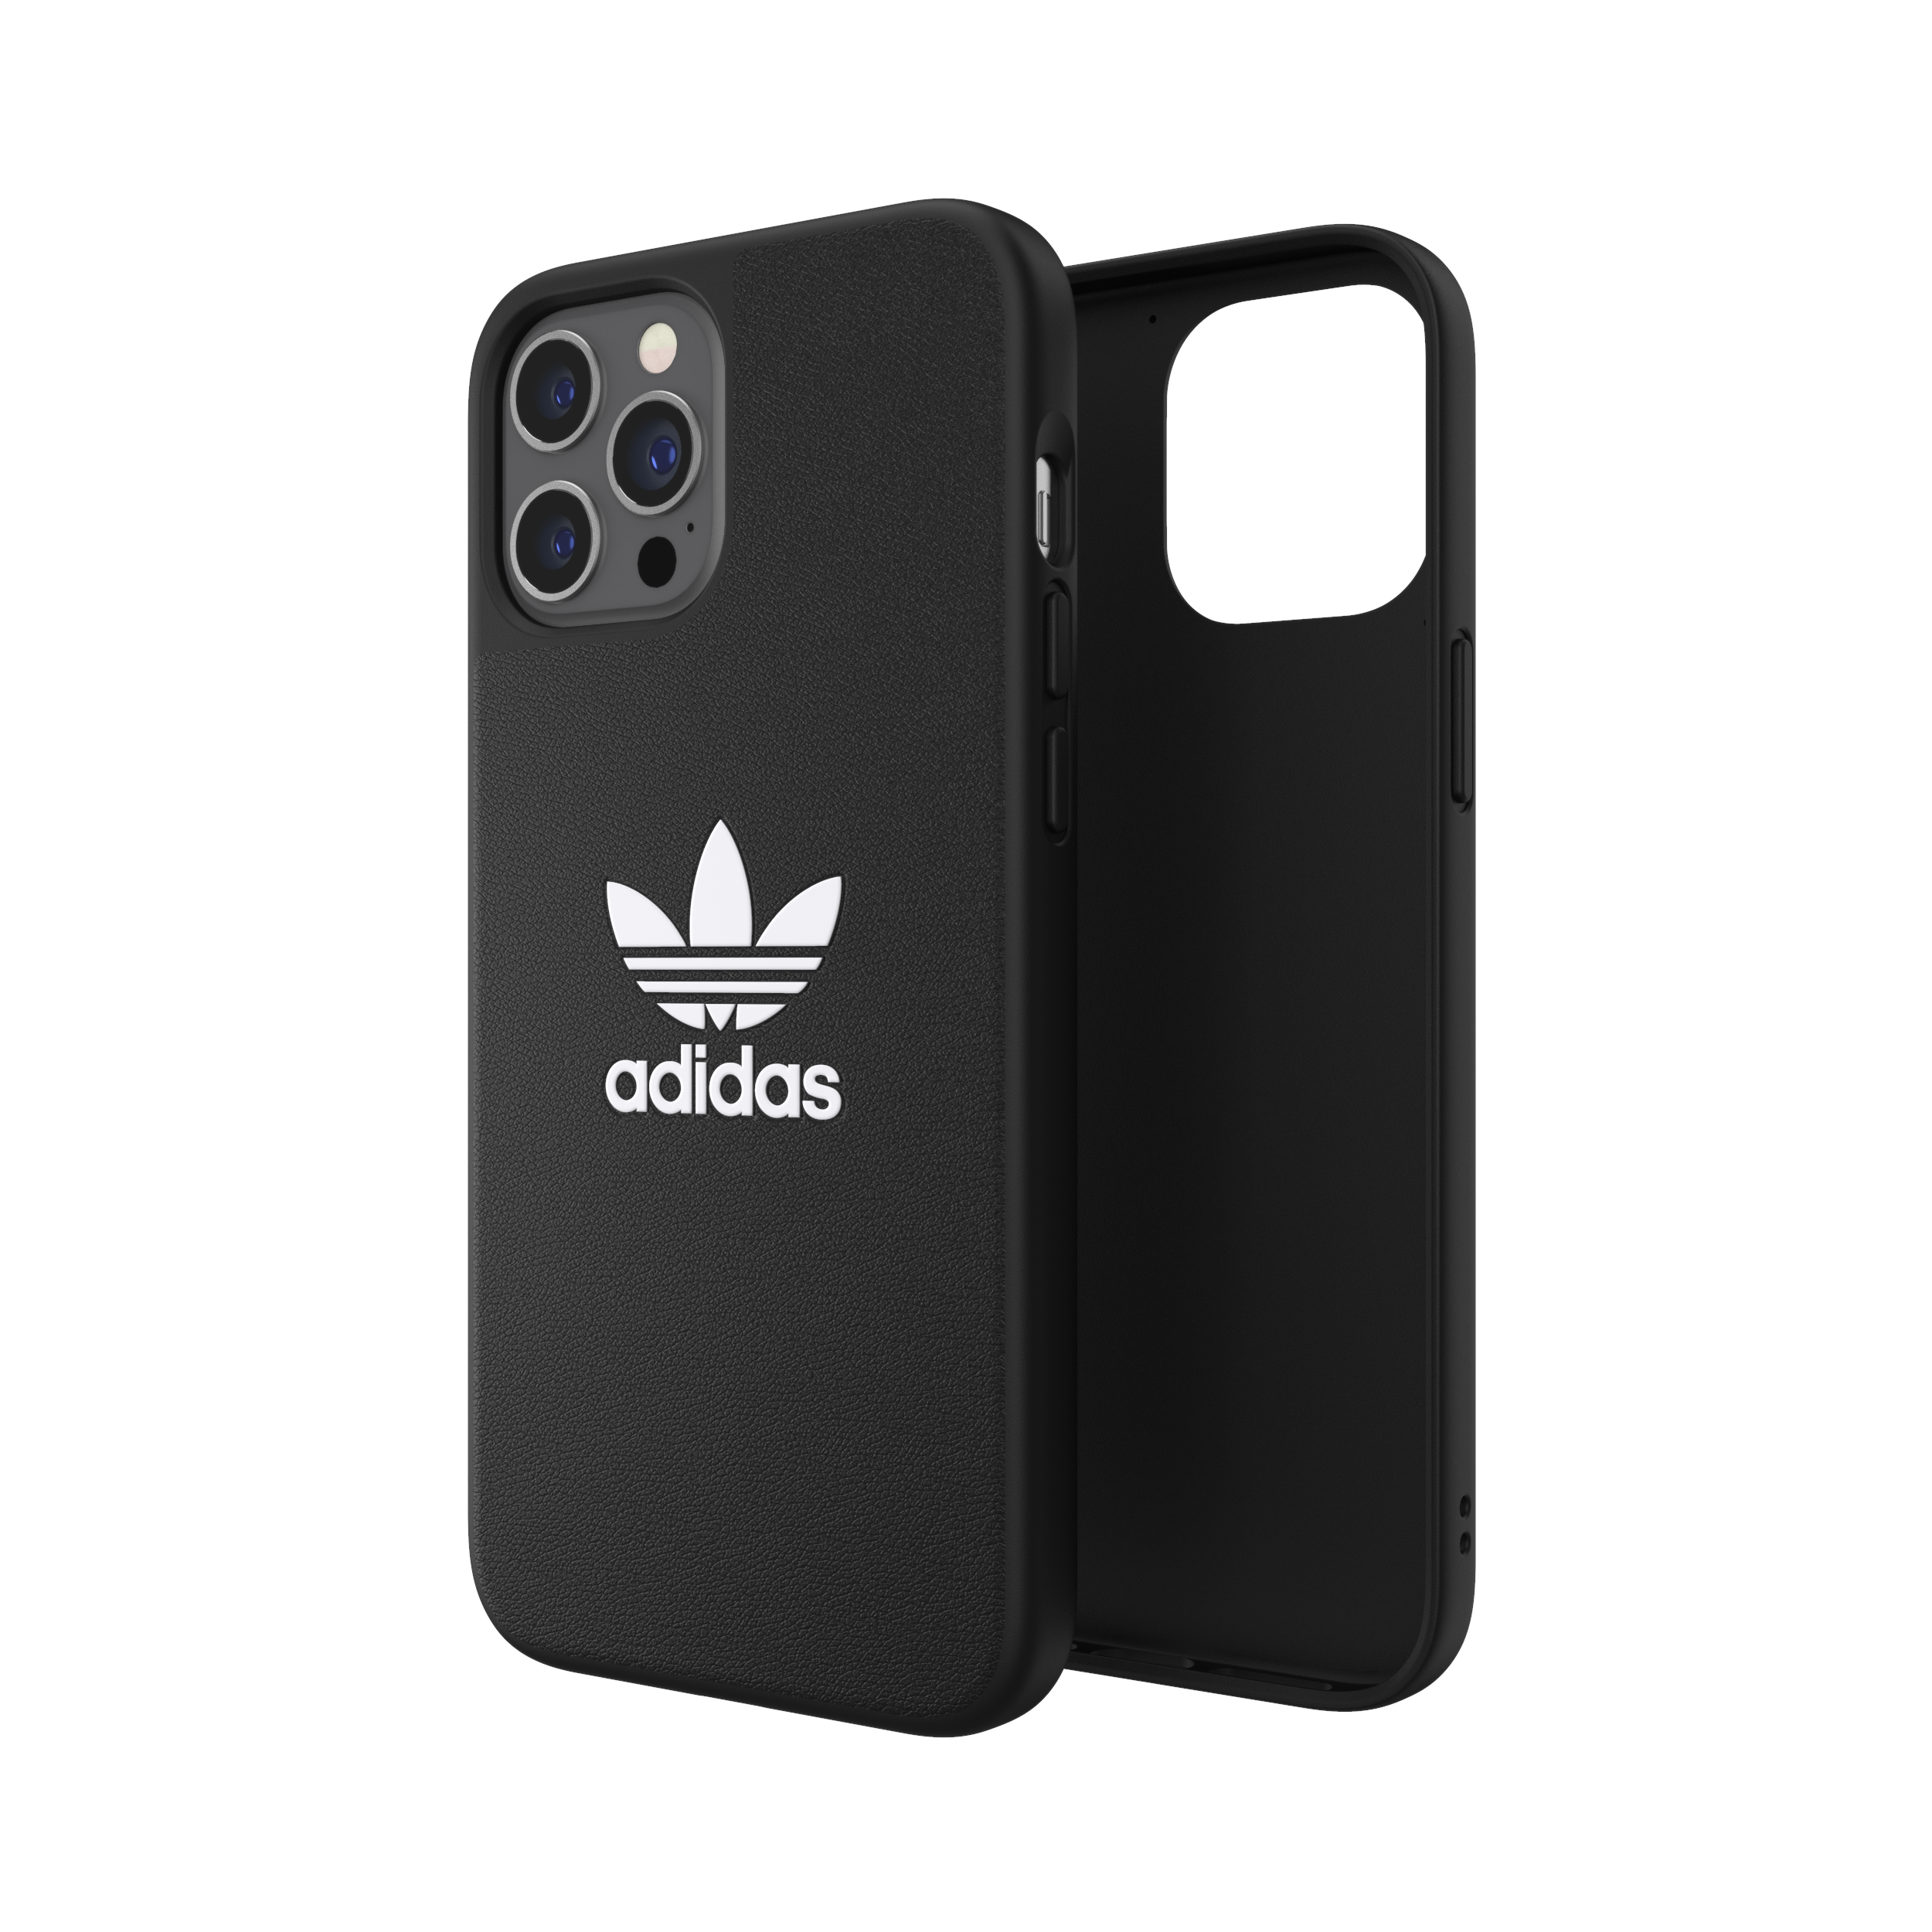 Adidas ORIGINALS Apple iPhone 12 Pro Max Basic Moulded Case - Back cover w/ Trefoil Design, Scratch & Drop Protection w/ TPU Bumper, Wireless Charging Compatible - Black/White